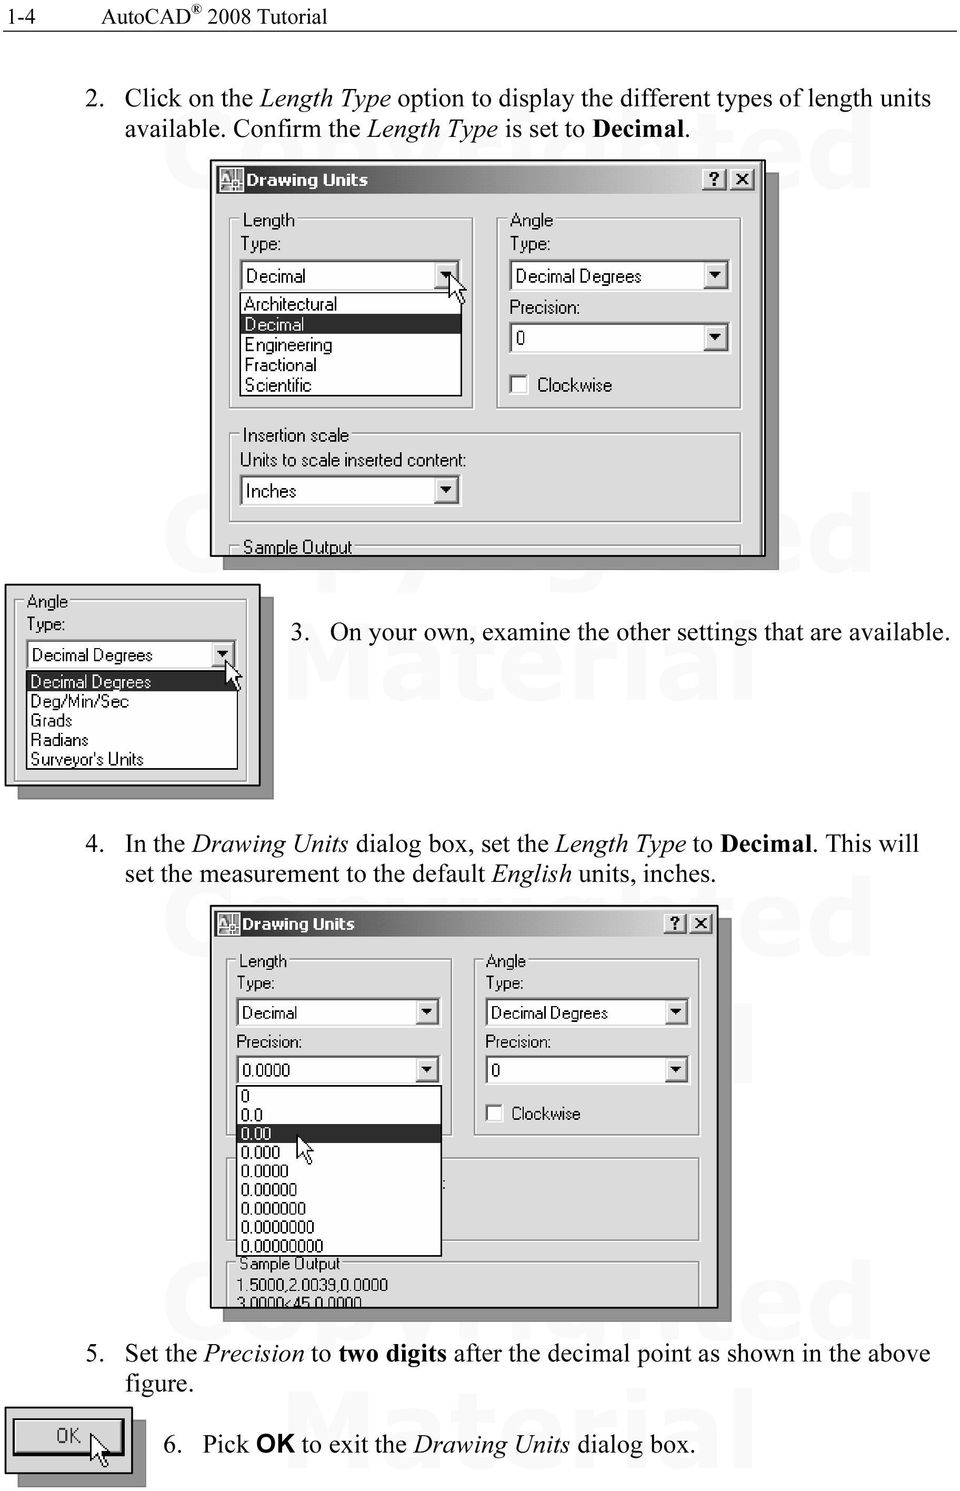 In the Drawing Units dialog box, set the Length Type to Decimal.